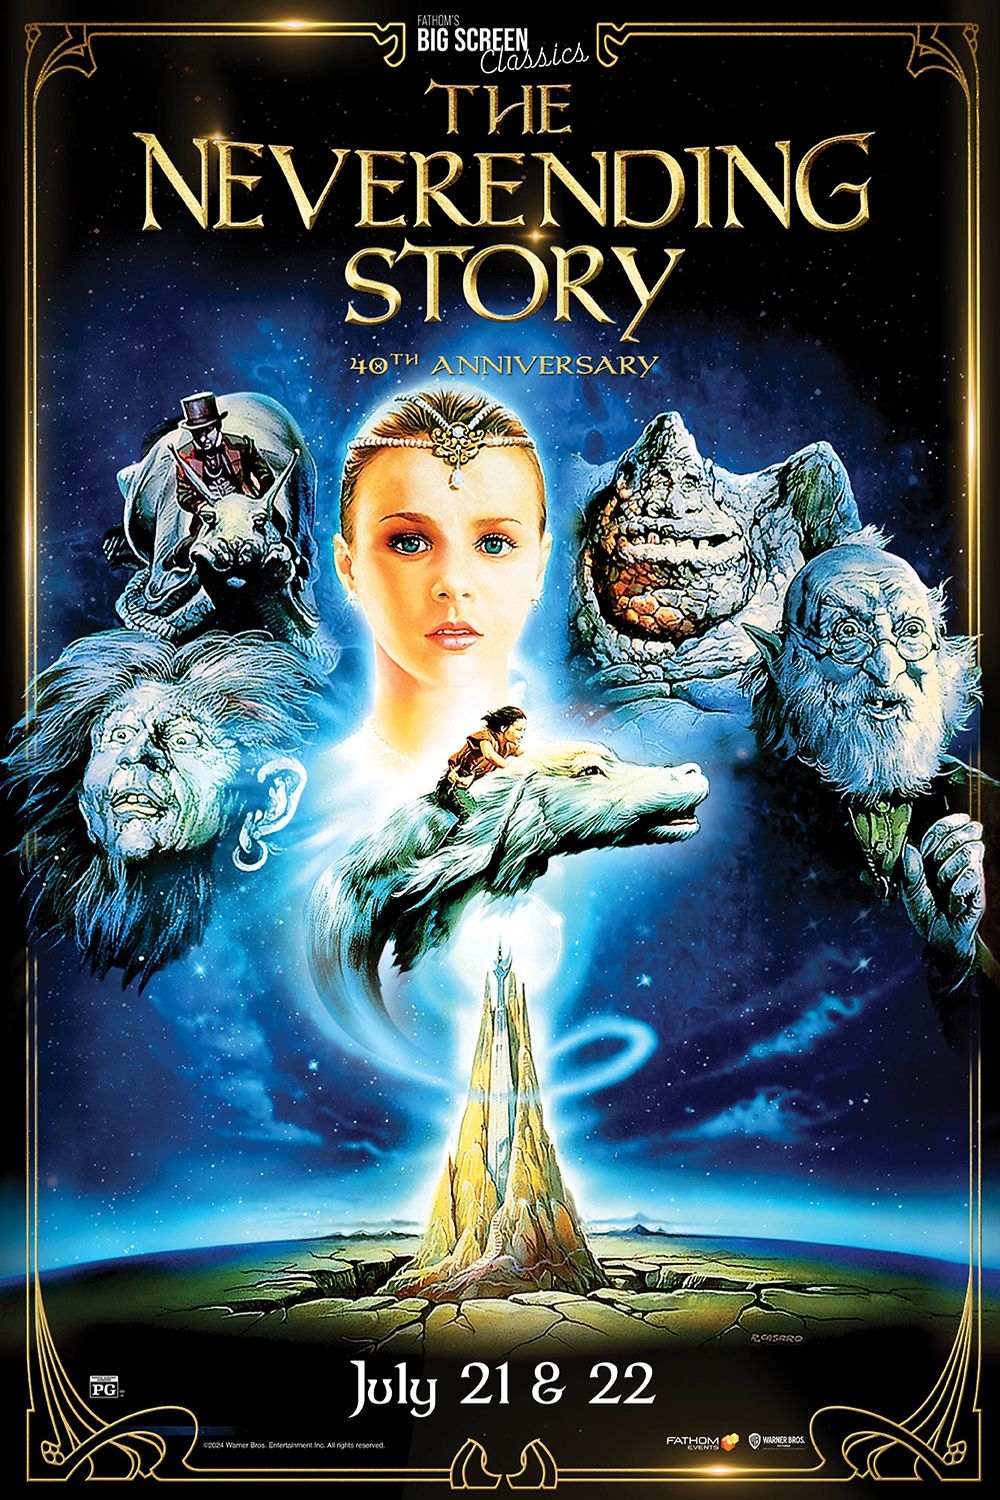 Poster of The NeverEnding Story 40th Anniversary